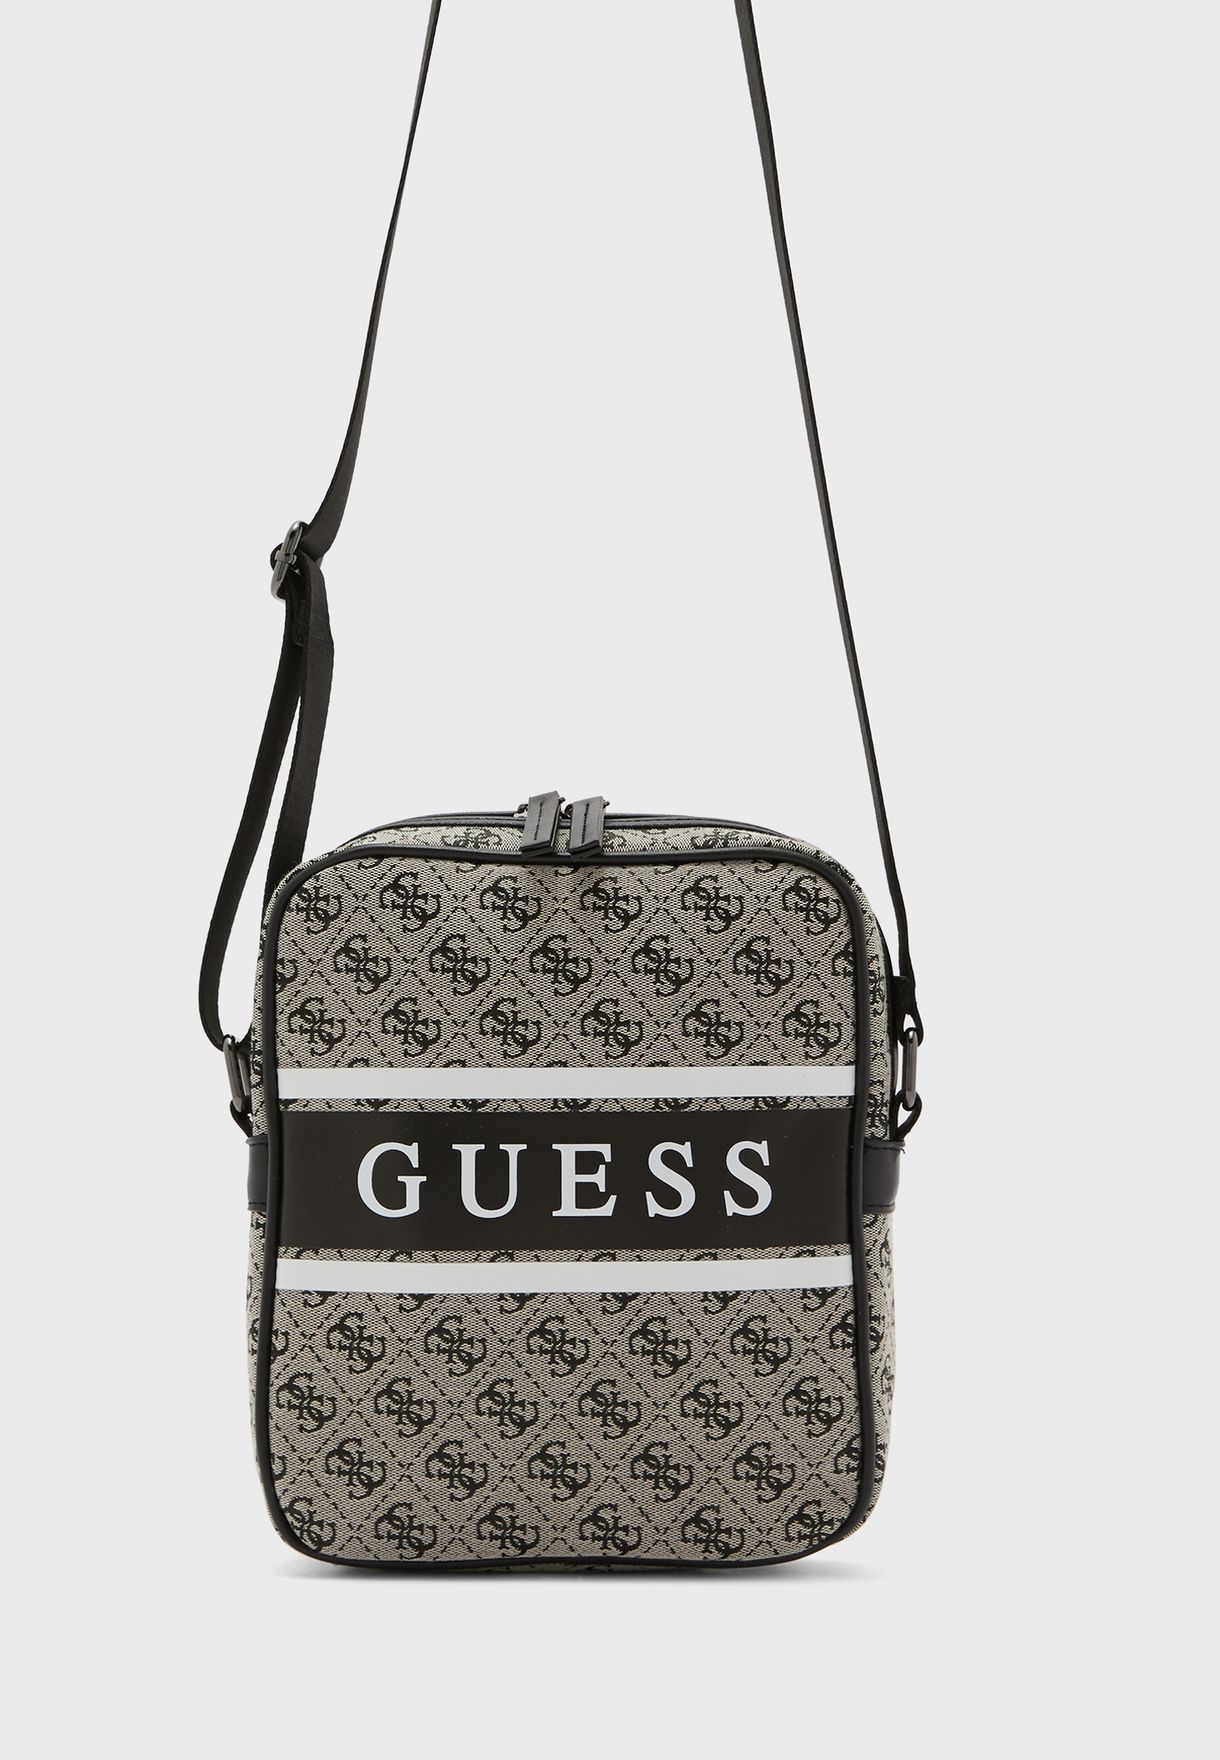 Buy Guess prints Printed Messenger for Men in Worldwide